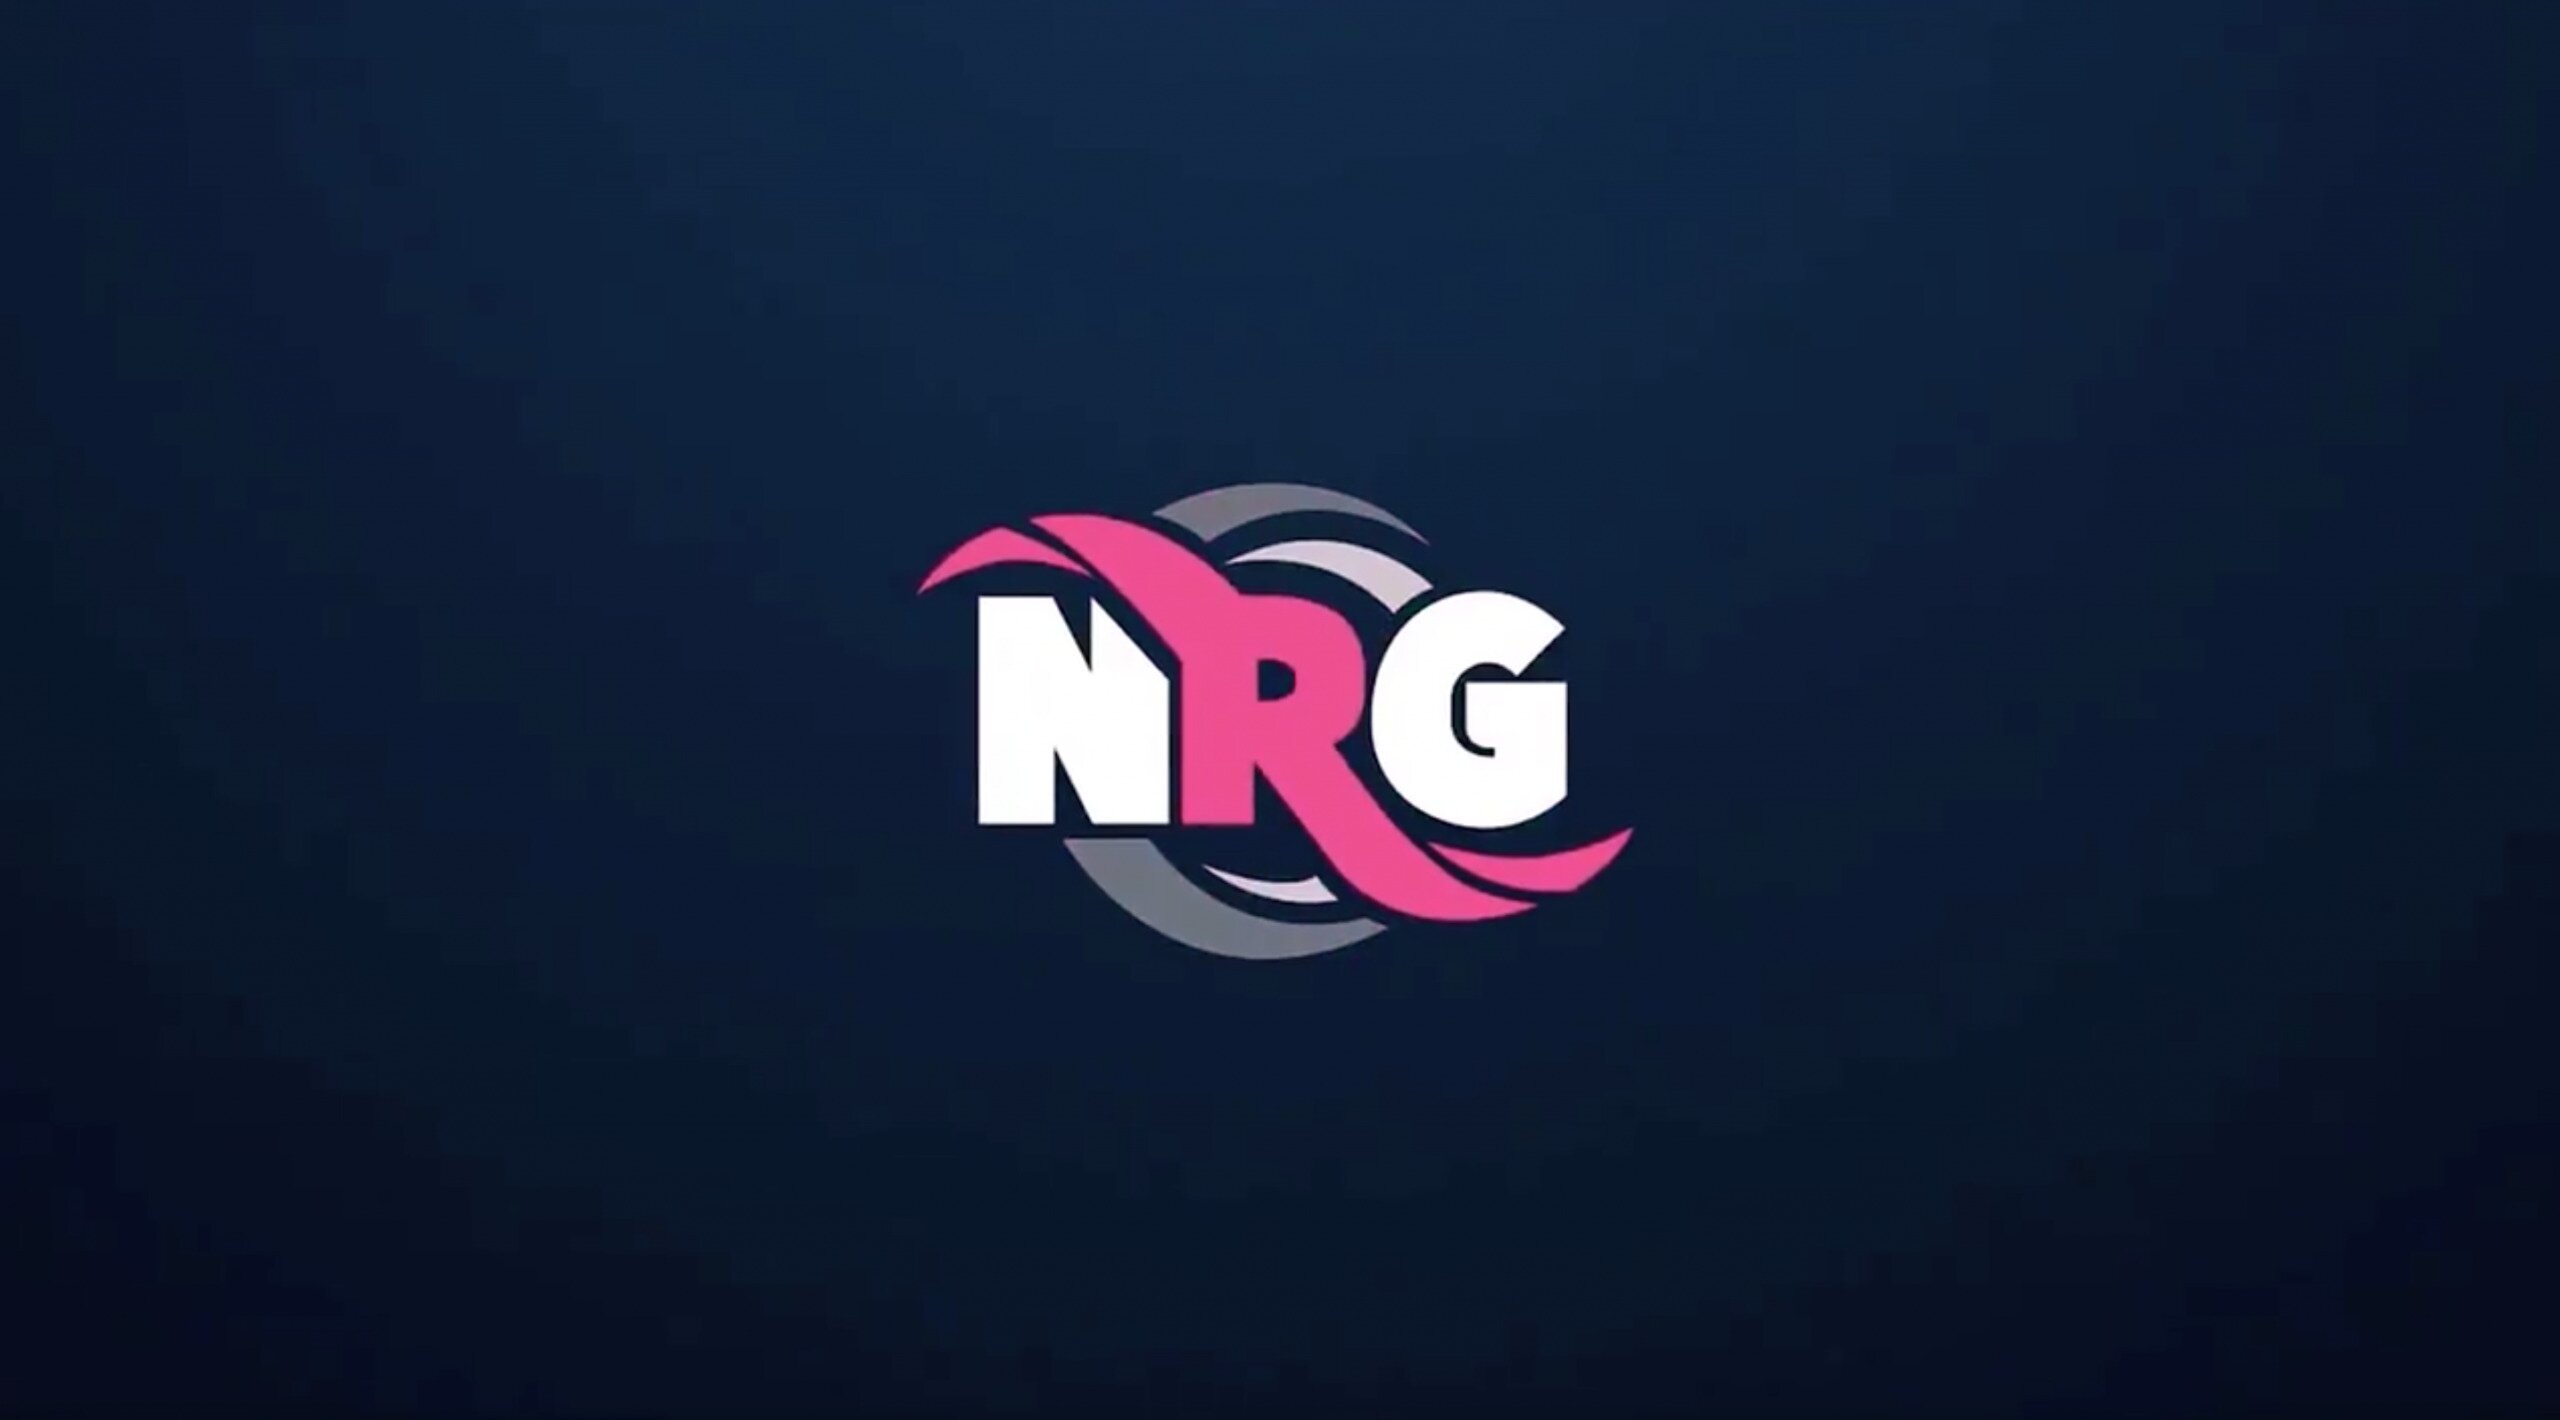 NRG is one of, if not the first, organization to pick up a professional Apex Legends player.